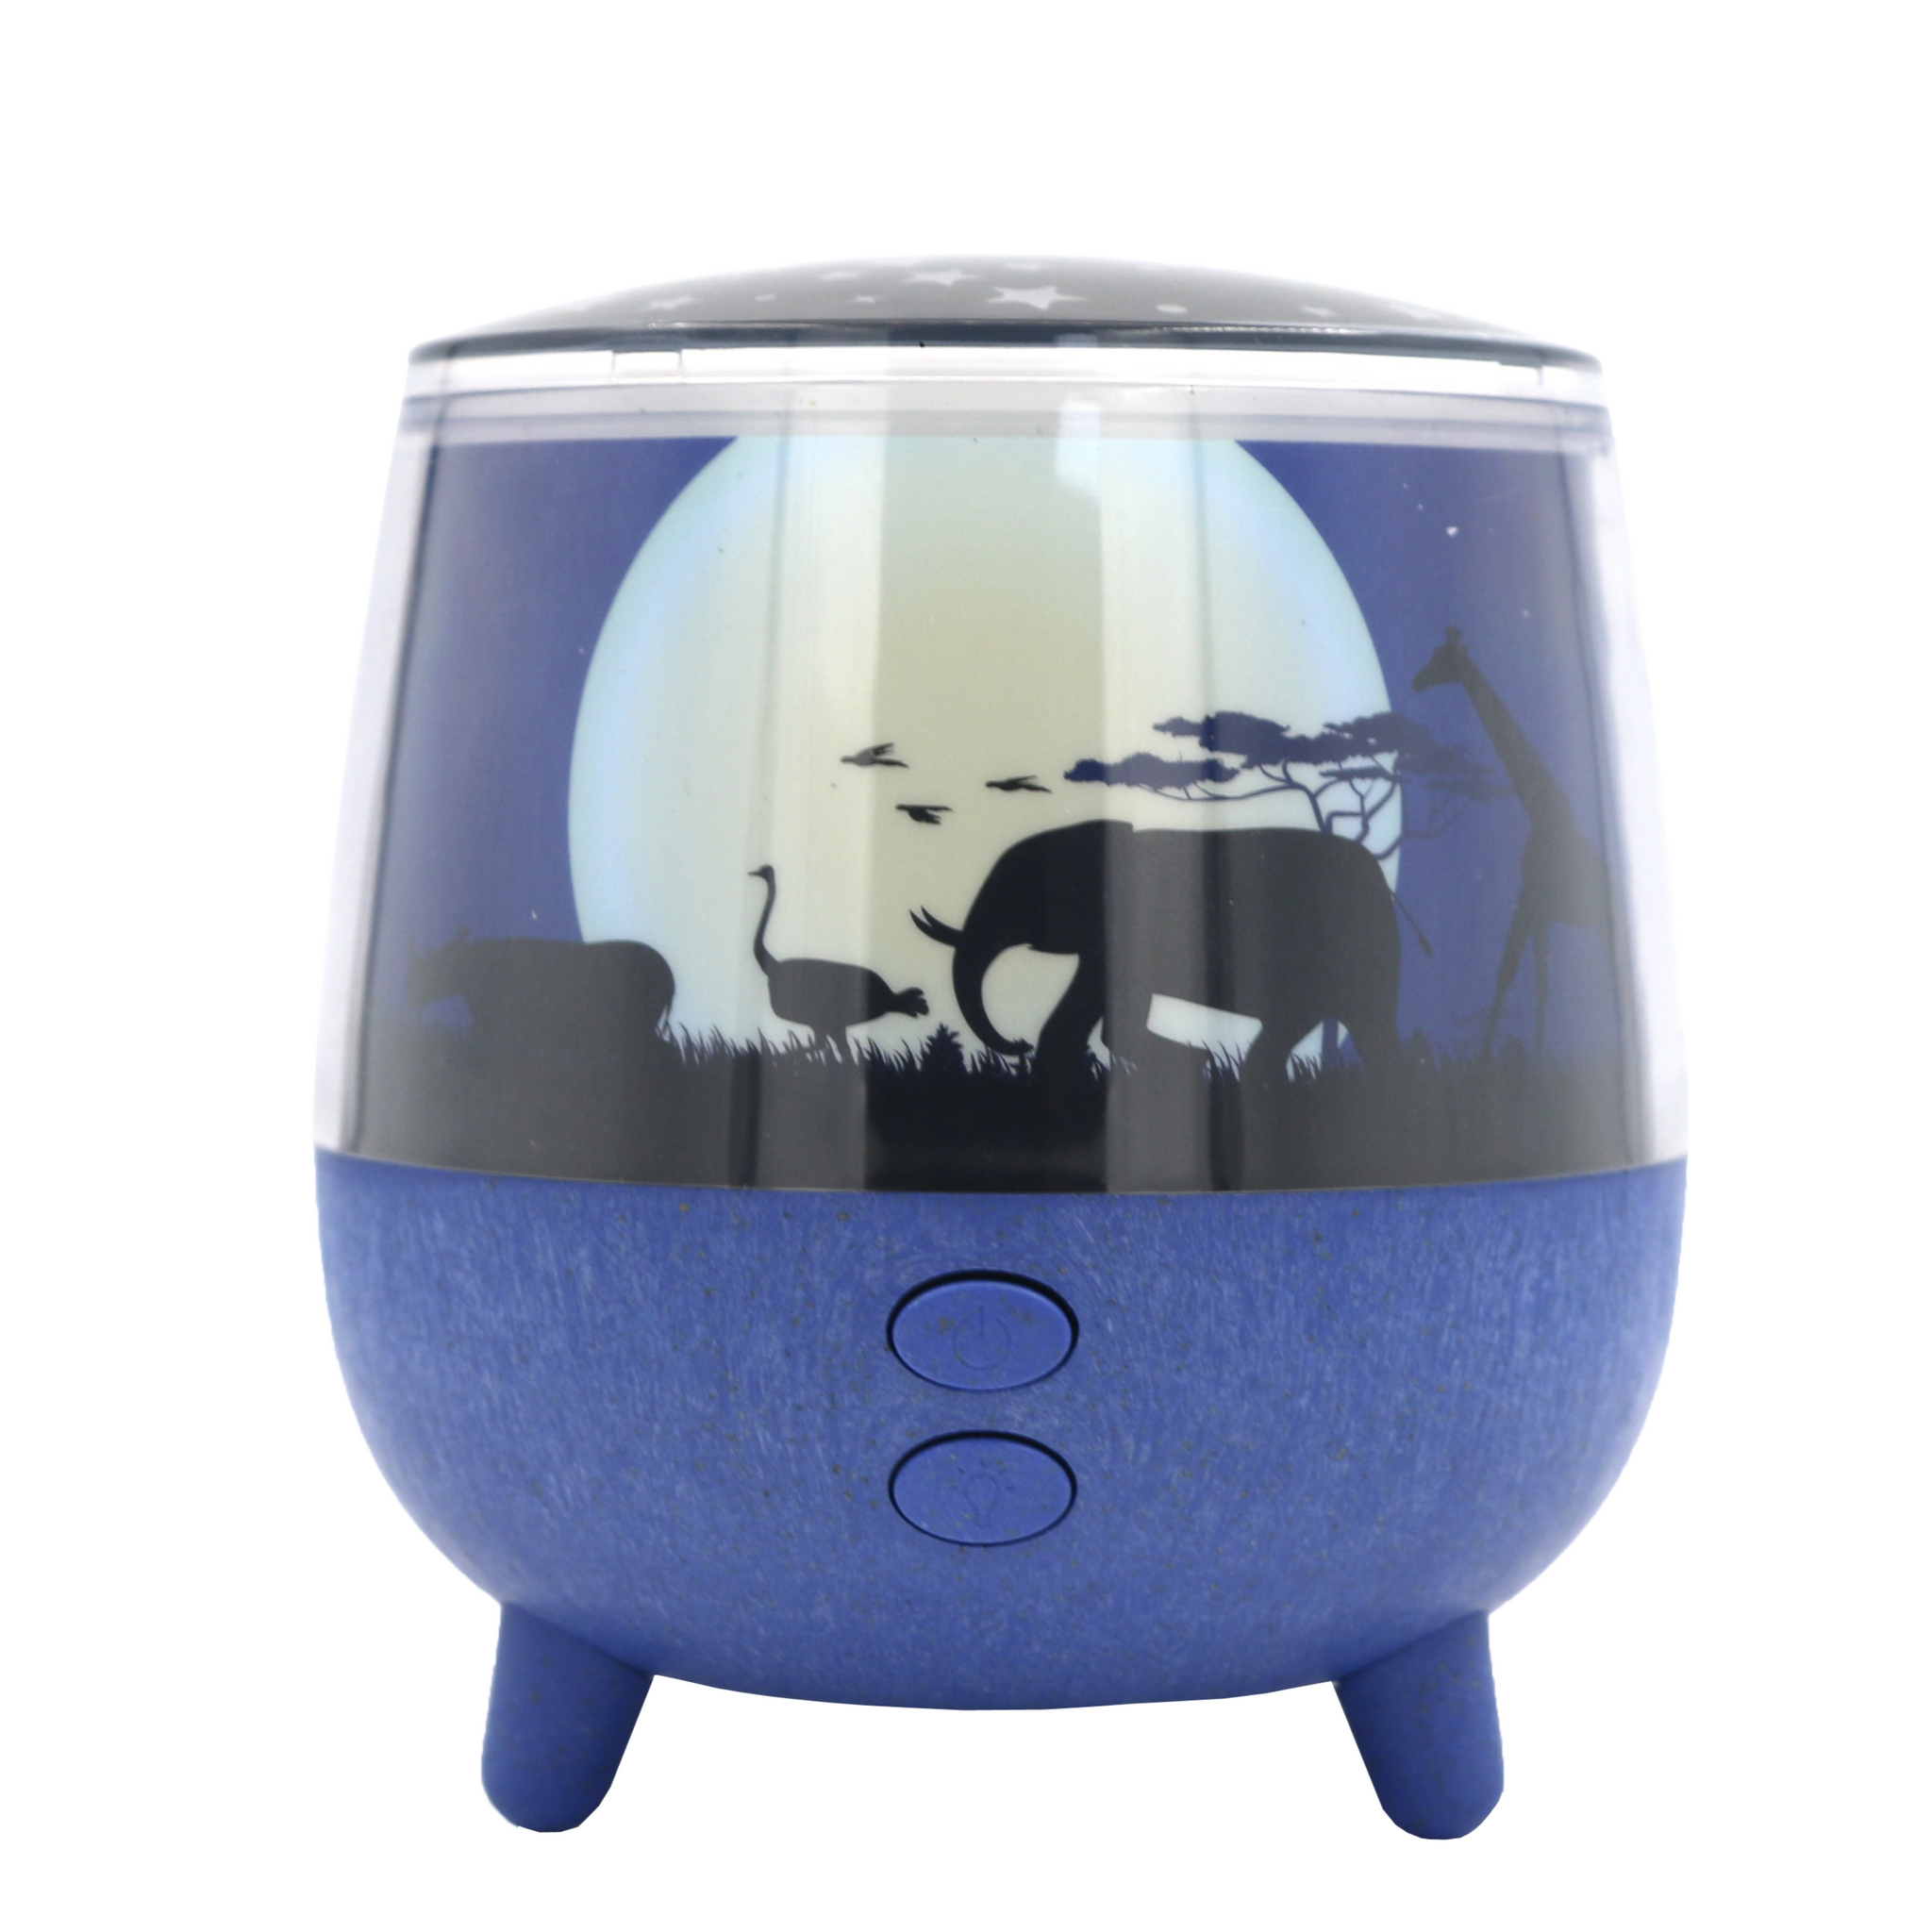 Le Comptoir Aroma - Lullaby Projection Essential Oil Diffuser